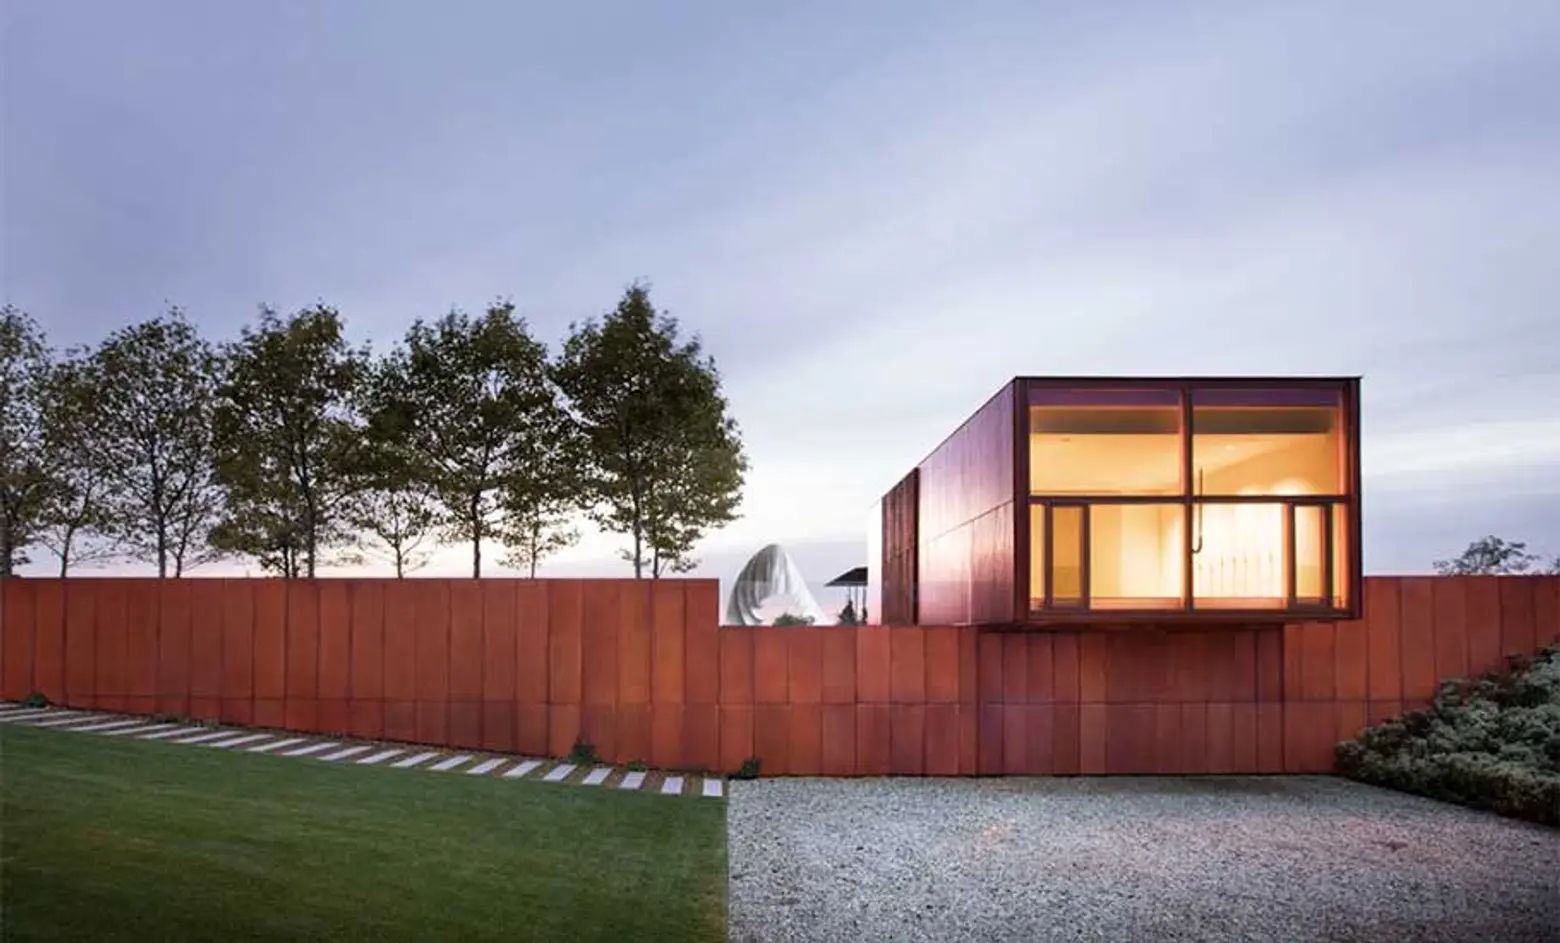 Thomas Phifer and Partners, glazed pavilion, geometrical wooden cabins, Millbrook House, geometrical modern home, Hudson River, cluster of buildings,